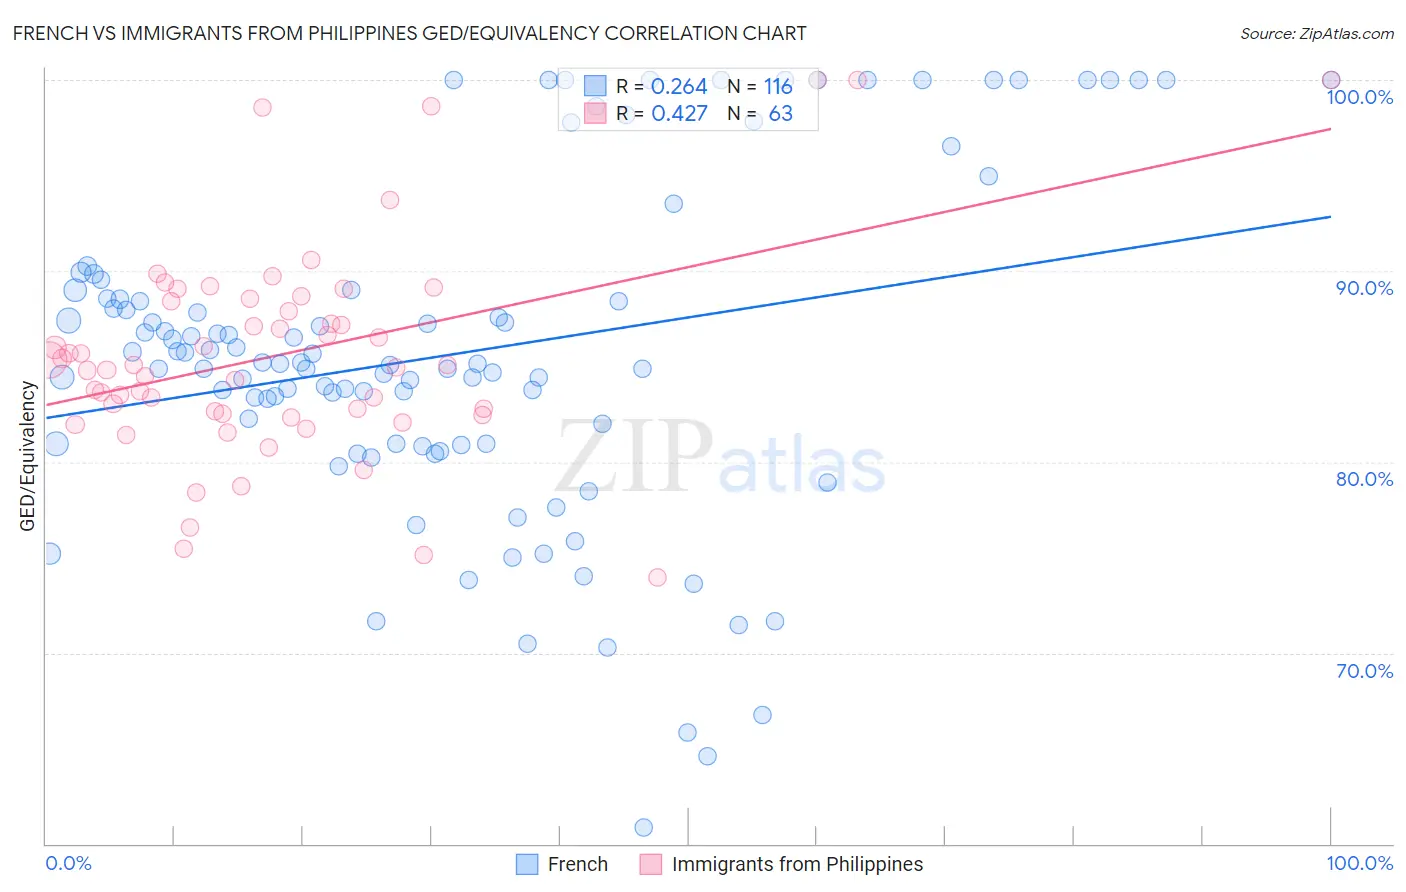 French vs Immigrants from Philippines GED/Equivalency